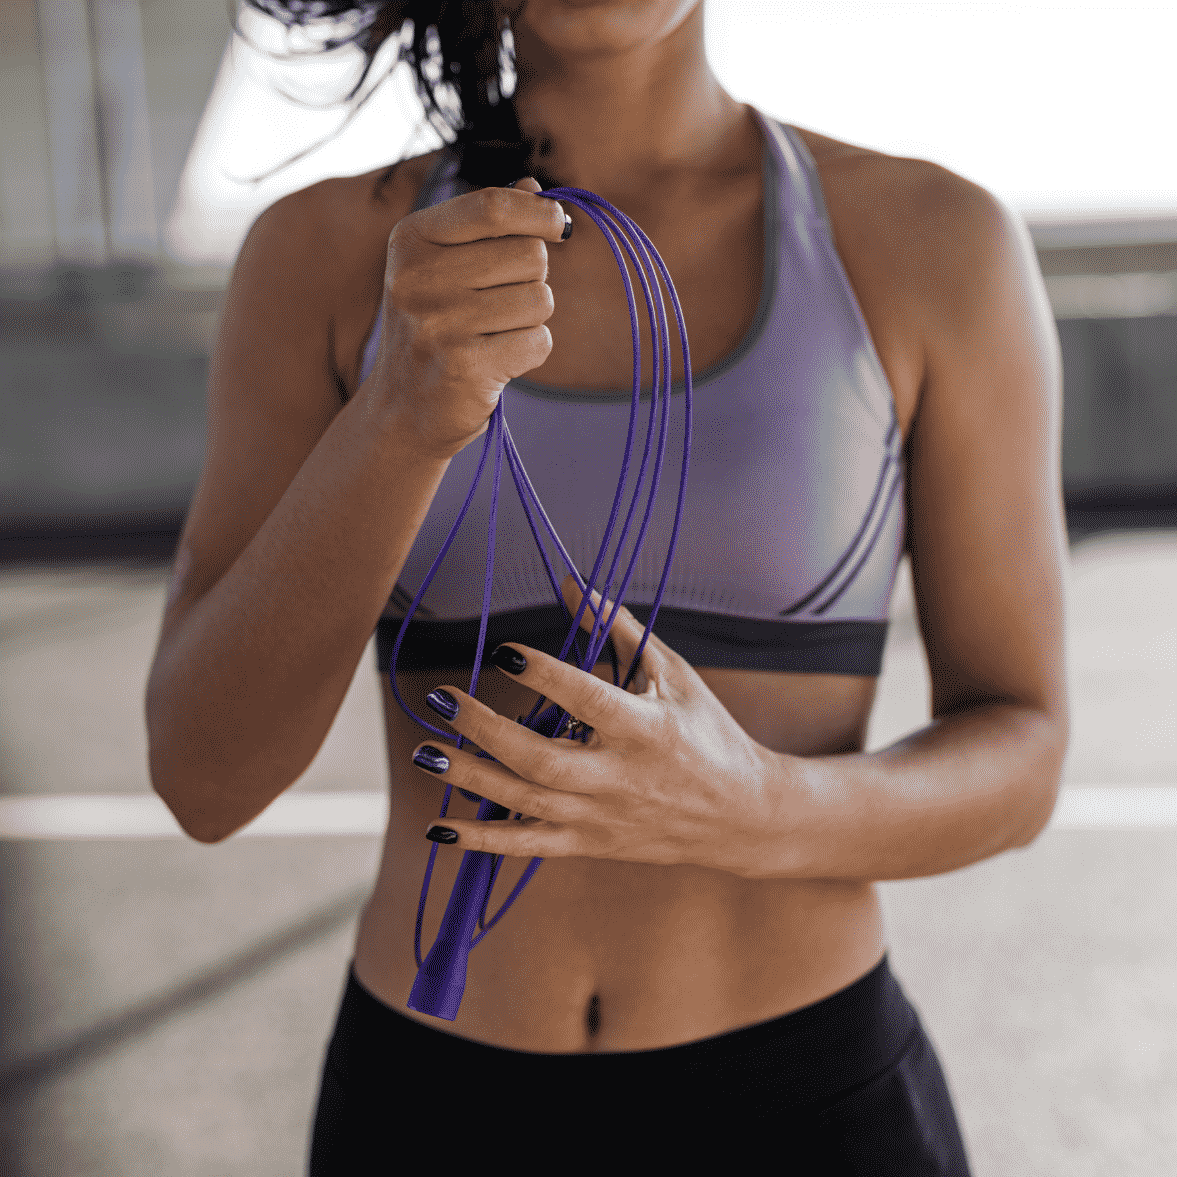 15-Minute Jump Rope Workout For Beginners